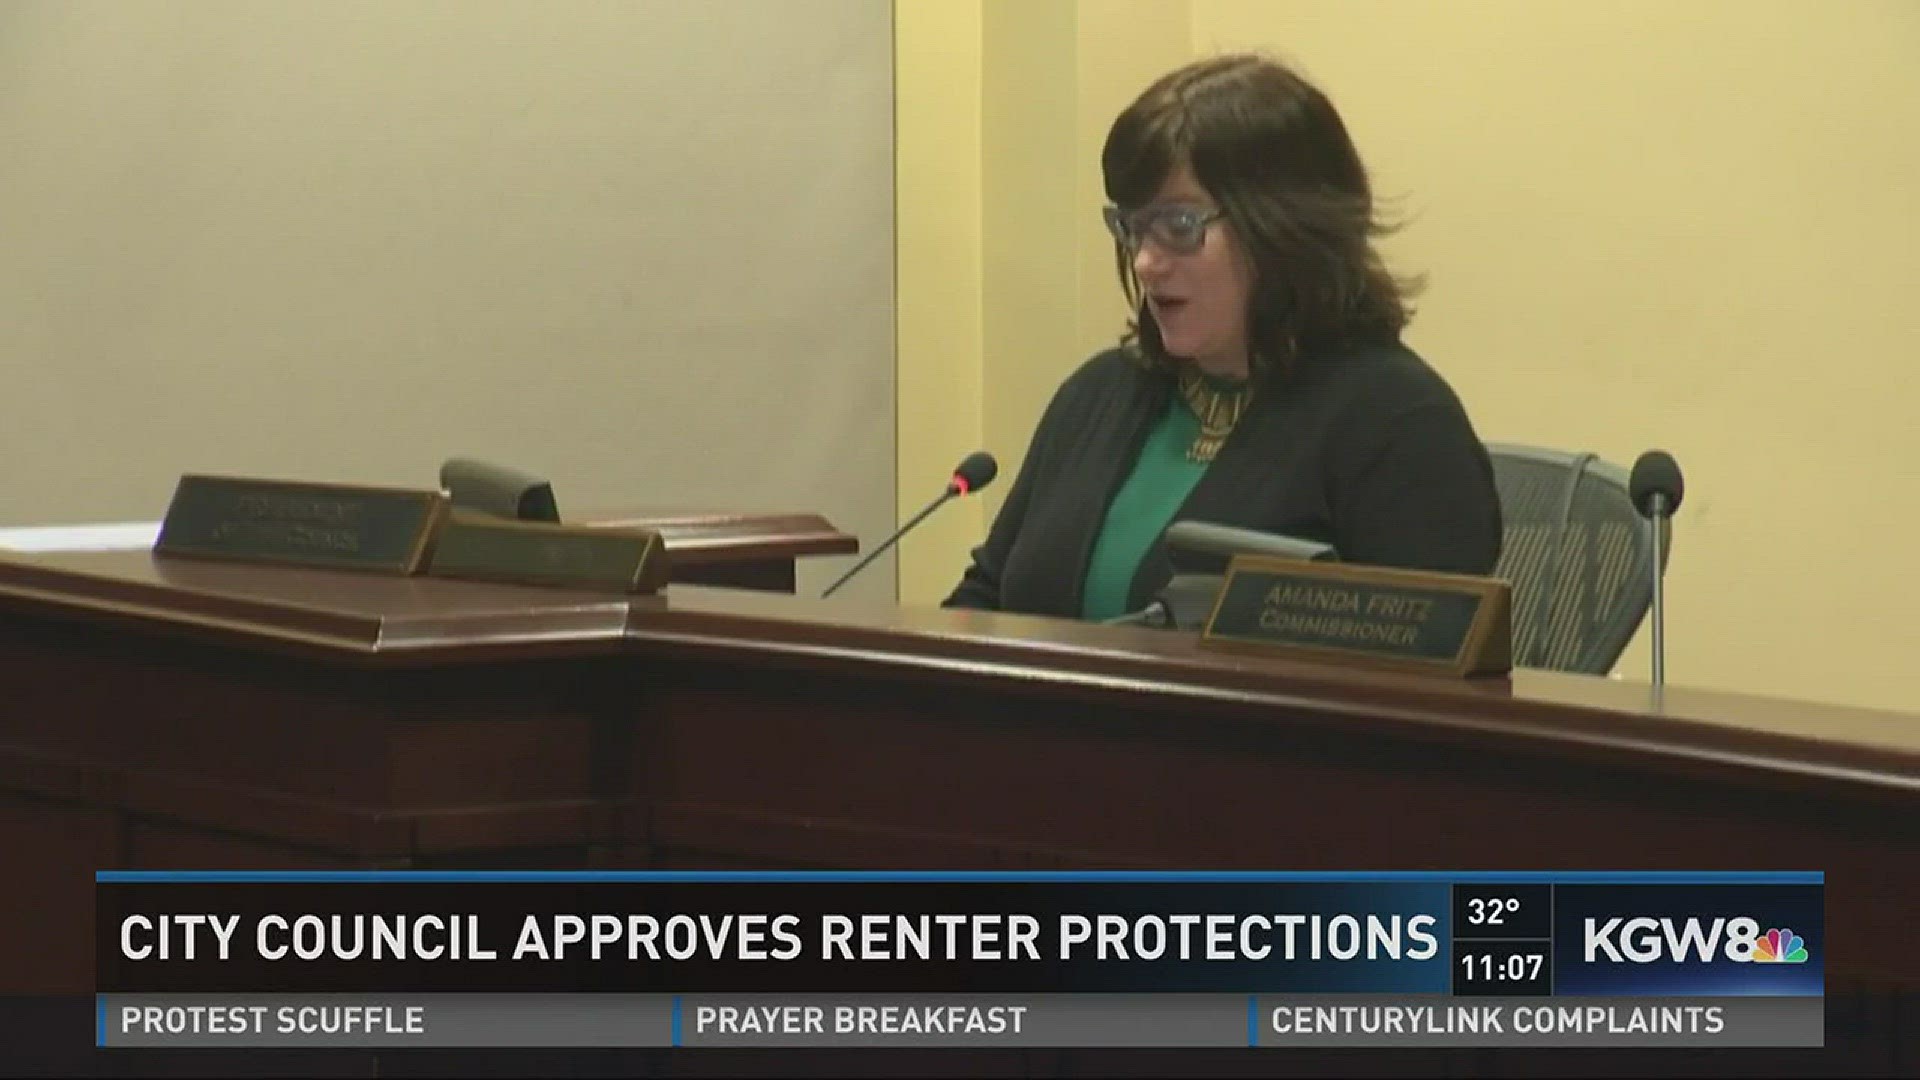 City council approves renter protections